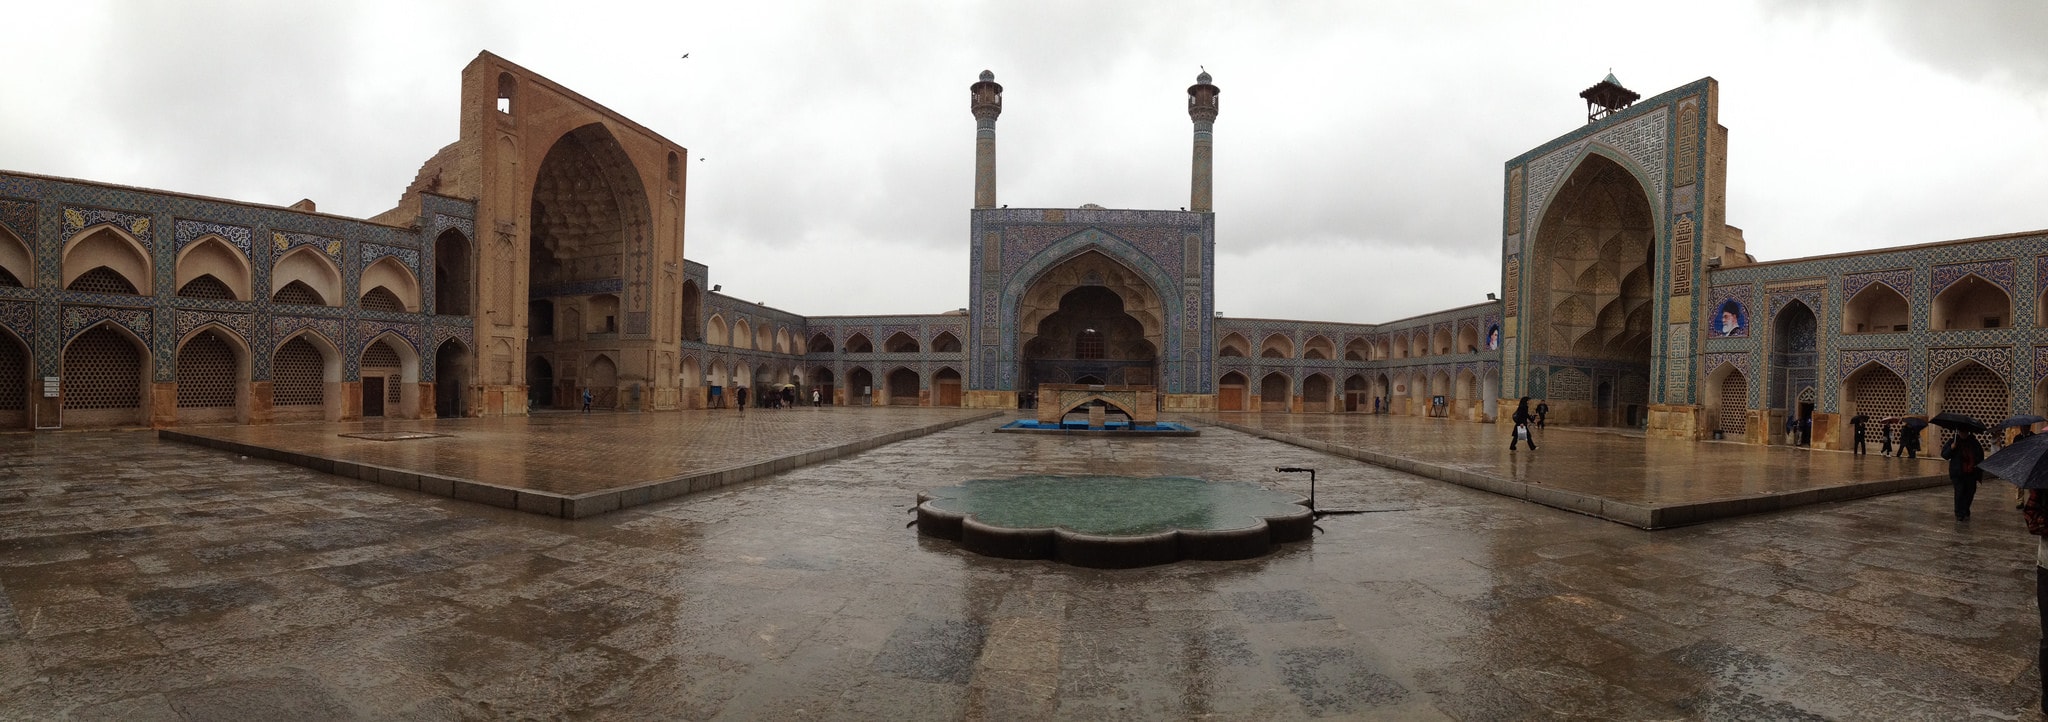 THE ANCIENT JAMEH MOSQUE OF ESFAHAN